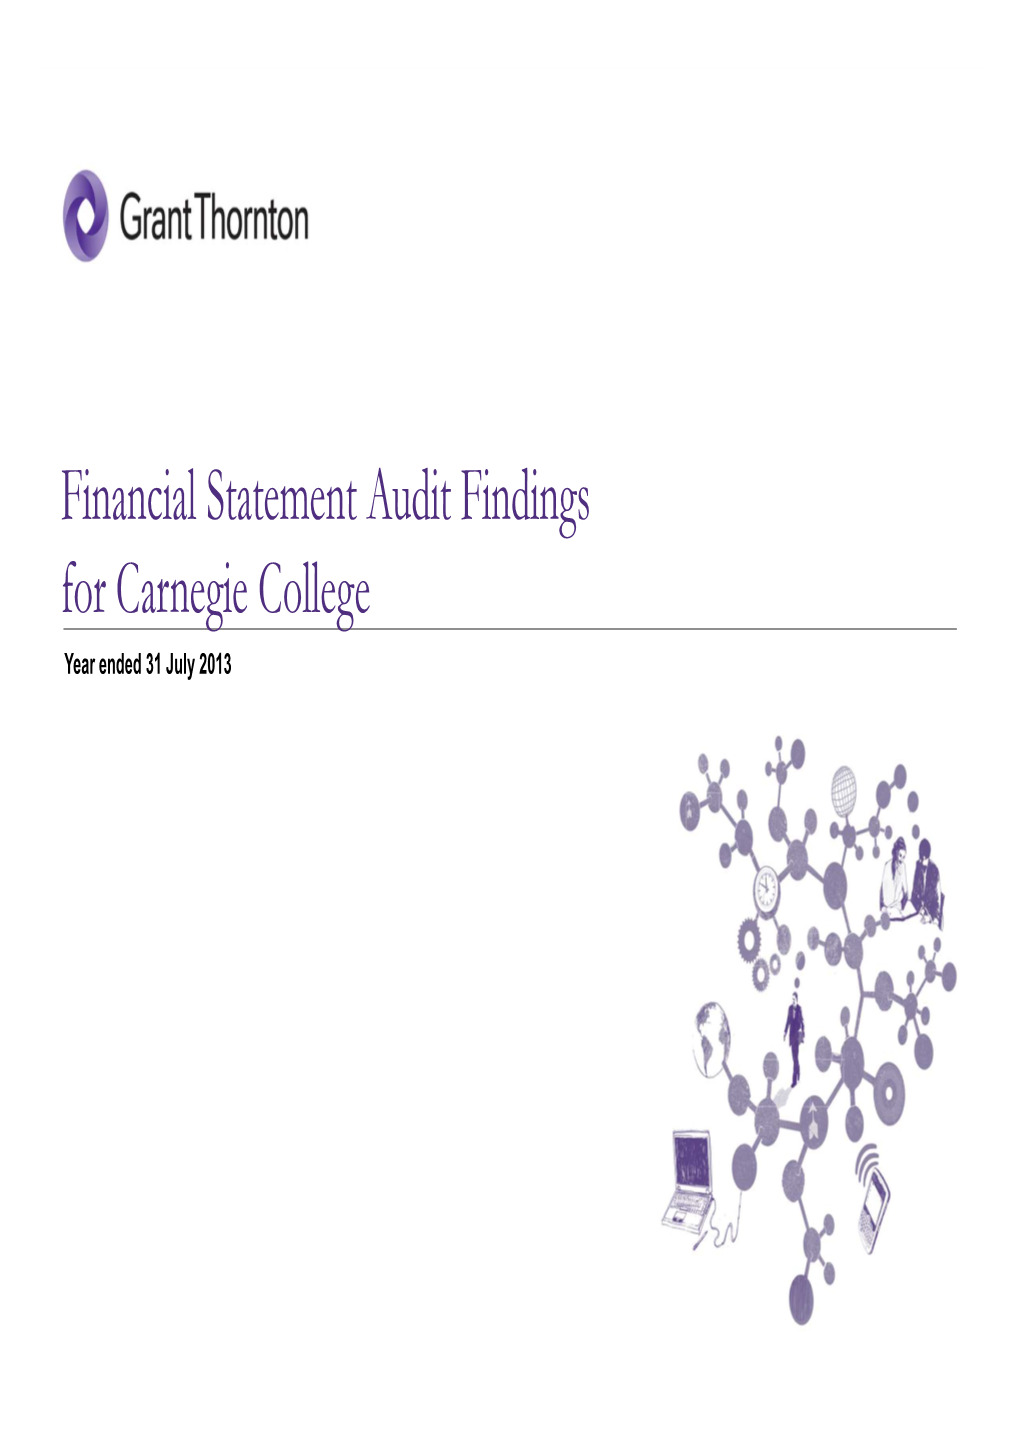 Financial Statement Audit Findings for Carnegie College Year Ended 31 July 2013